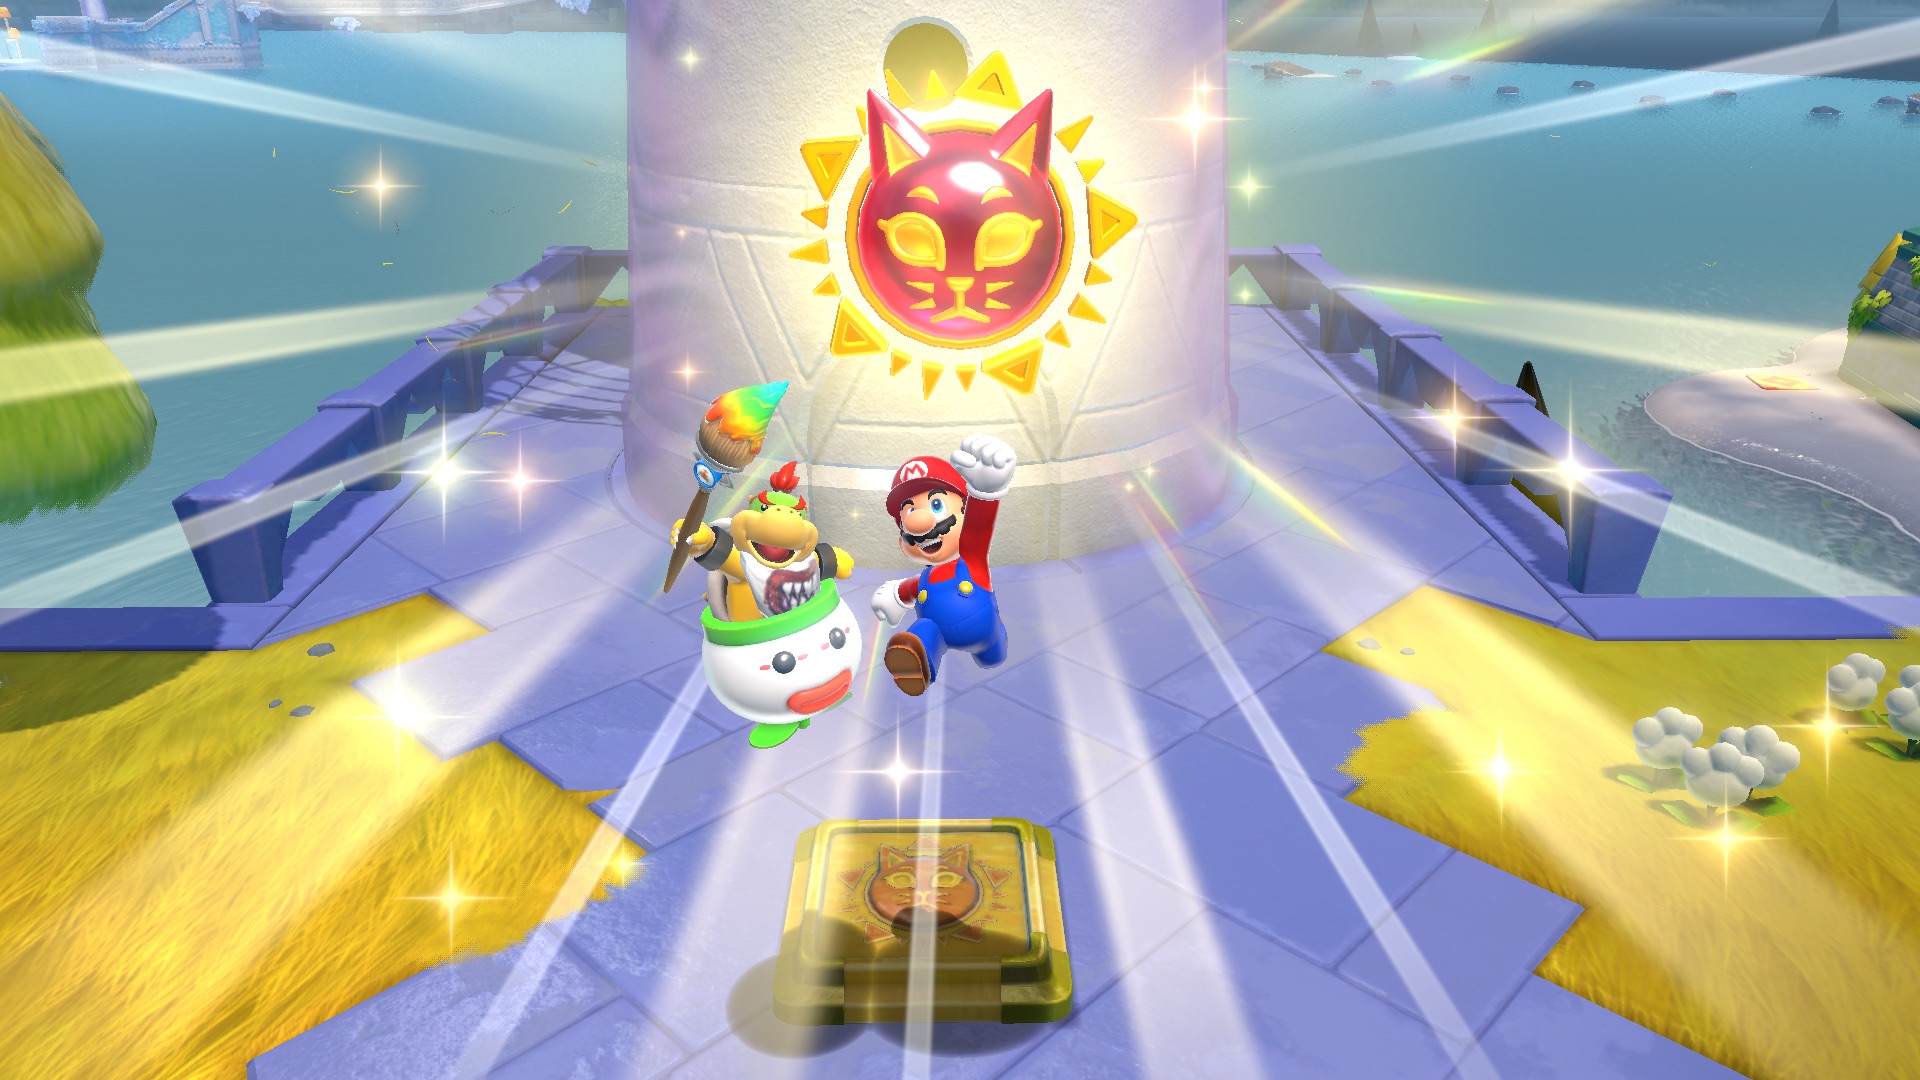 Mario and Bowser Jr. bounce with joy in a screenshot from Super Mario 3D World + Bowser’s Fury